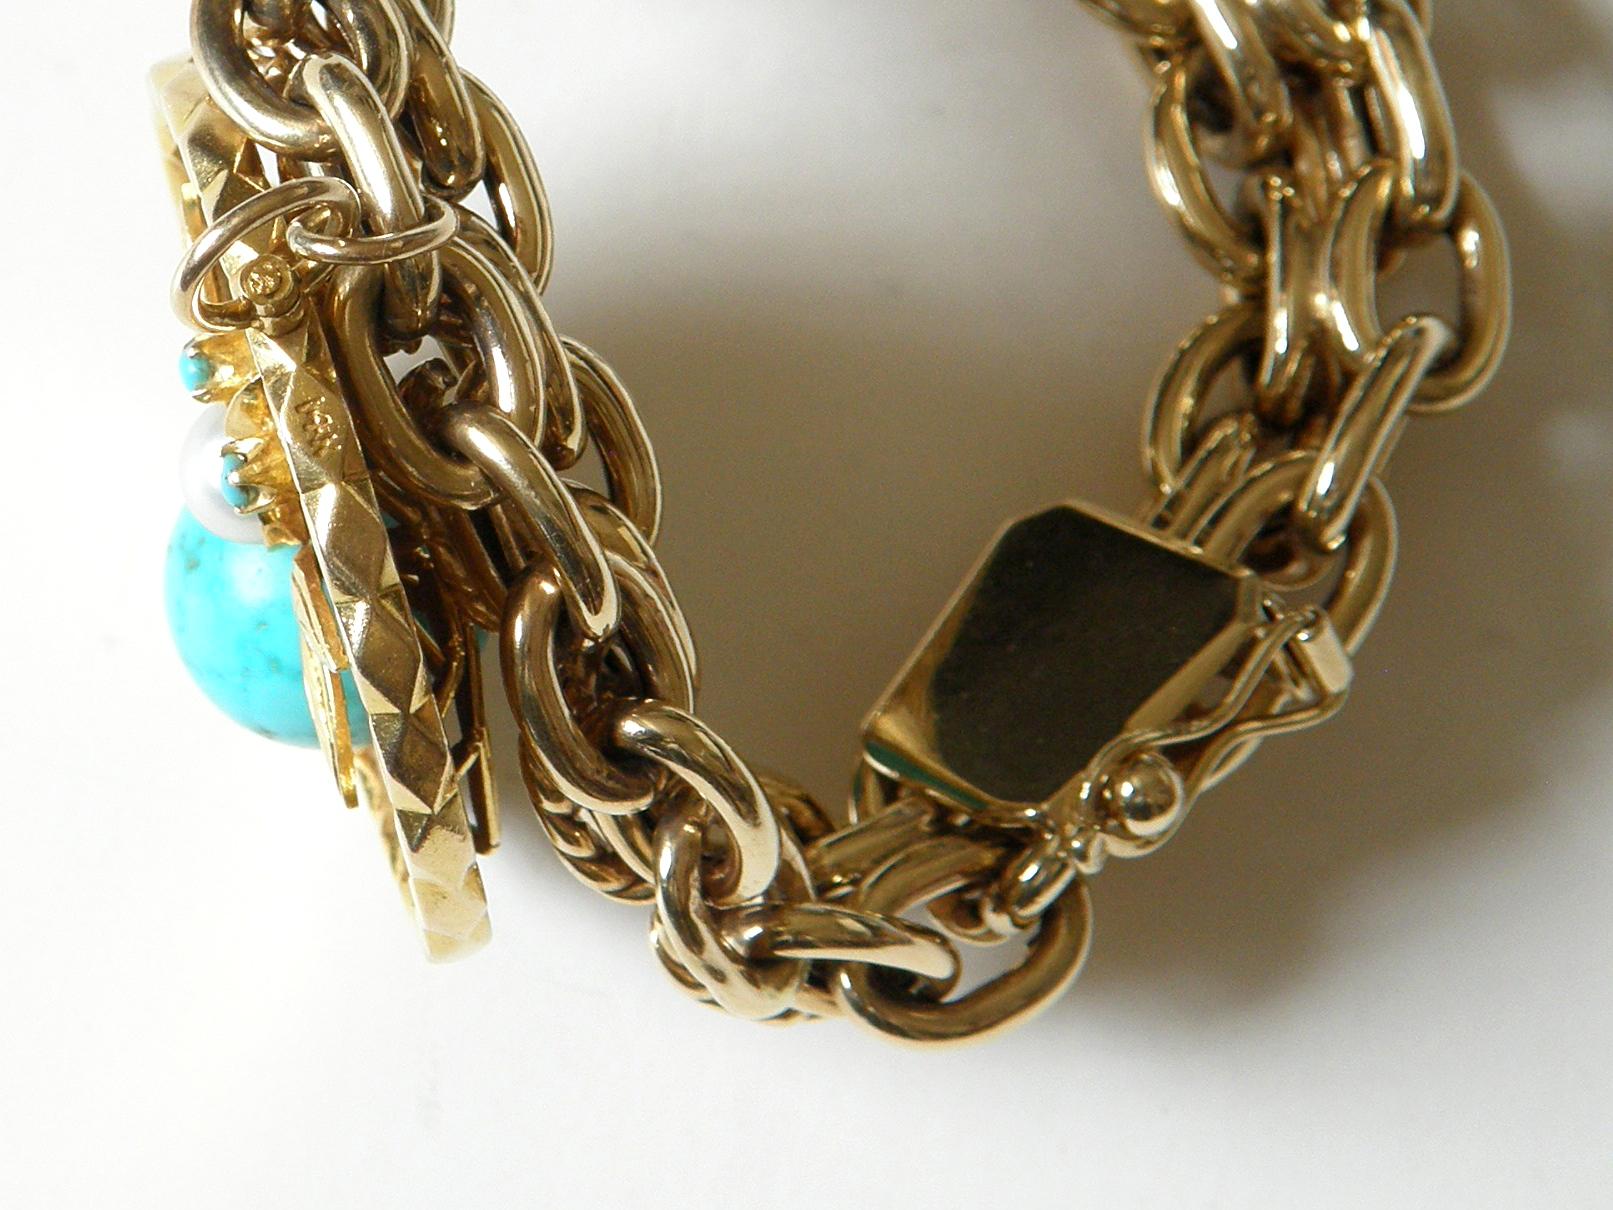 14K Gold Double Chain Link Bracelet with Giant Two Sided Spider and Fly Charm 4